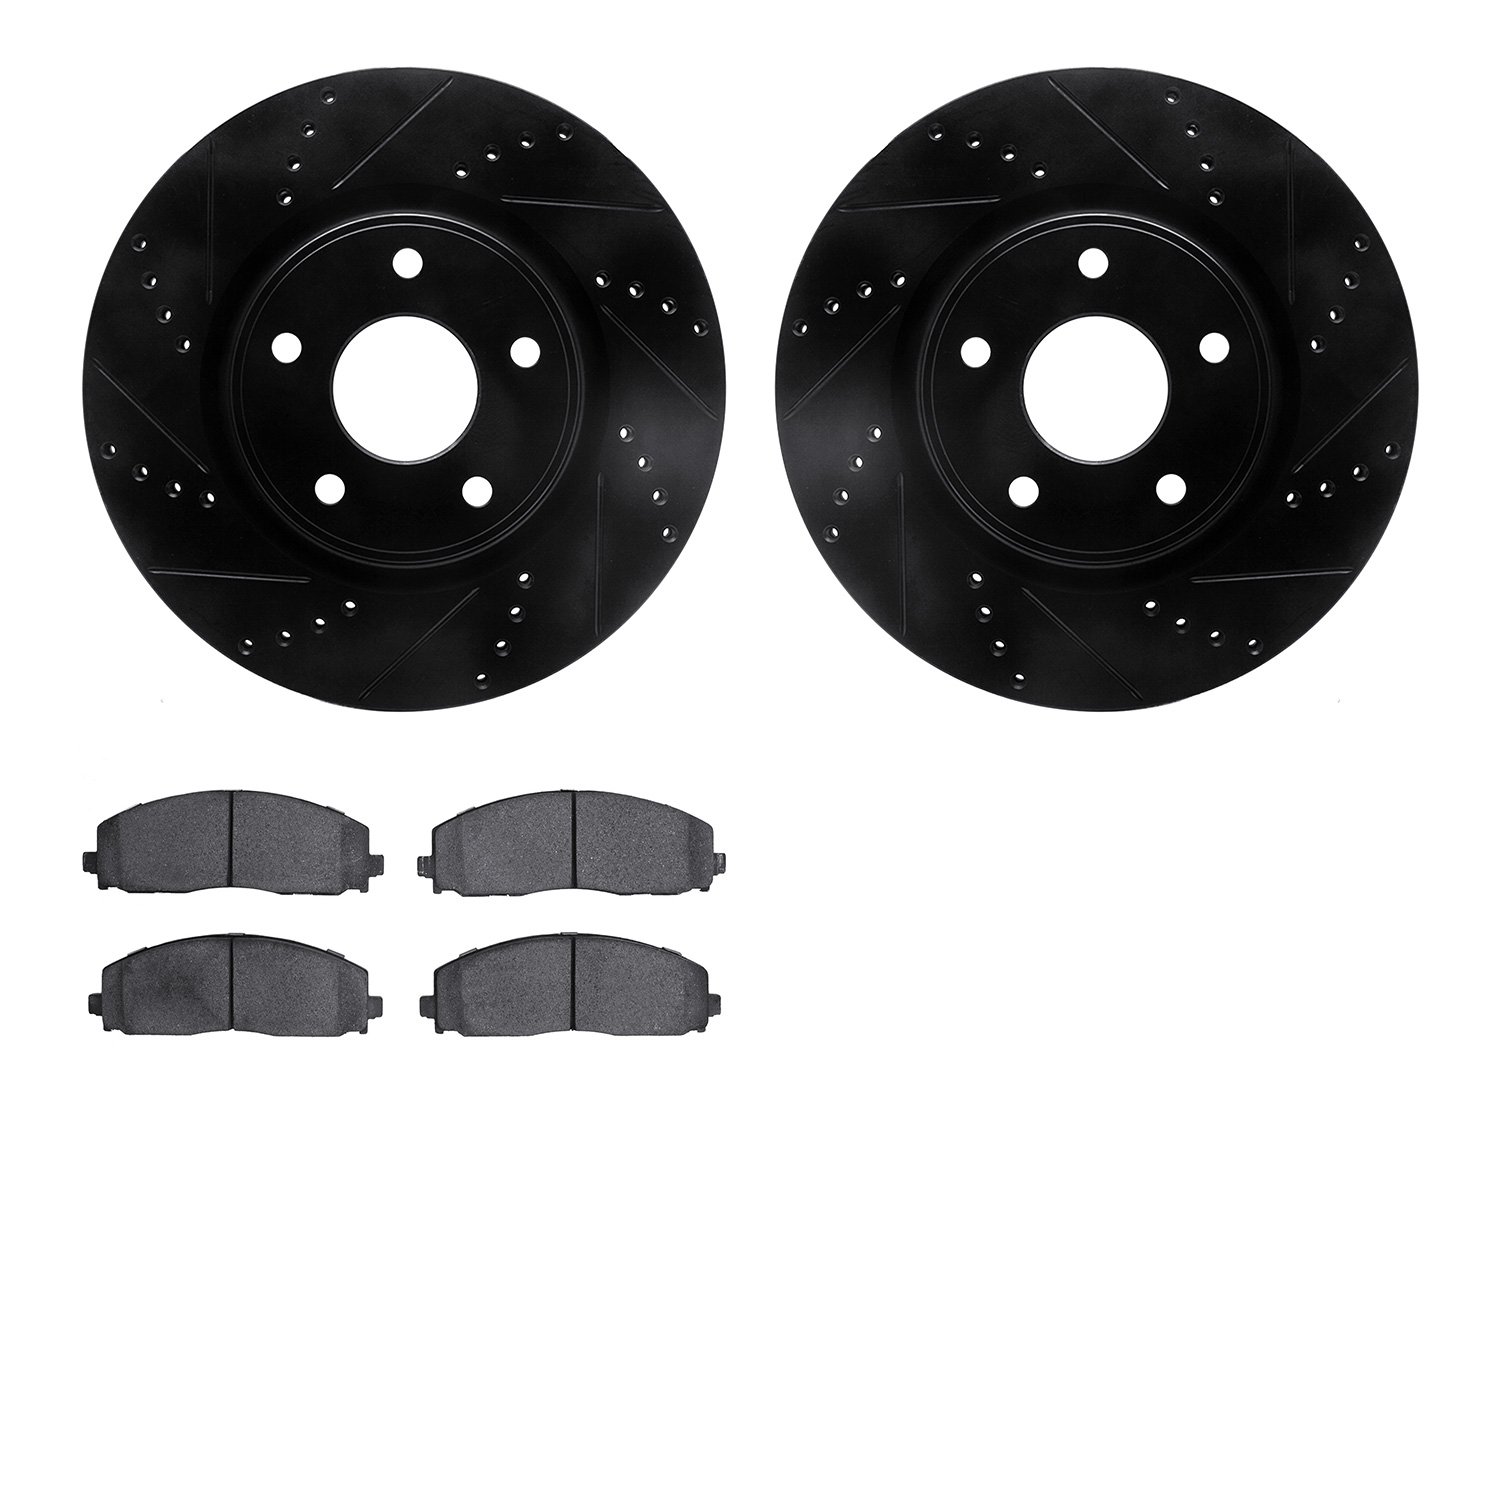 8402-40023 Drilled/Slotted Brake Rotors with Ultimate-Duty Brake Pads Kit [Black], Fits Select Multiple Makes/Models, Position: